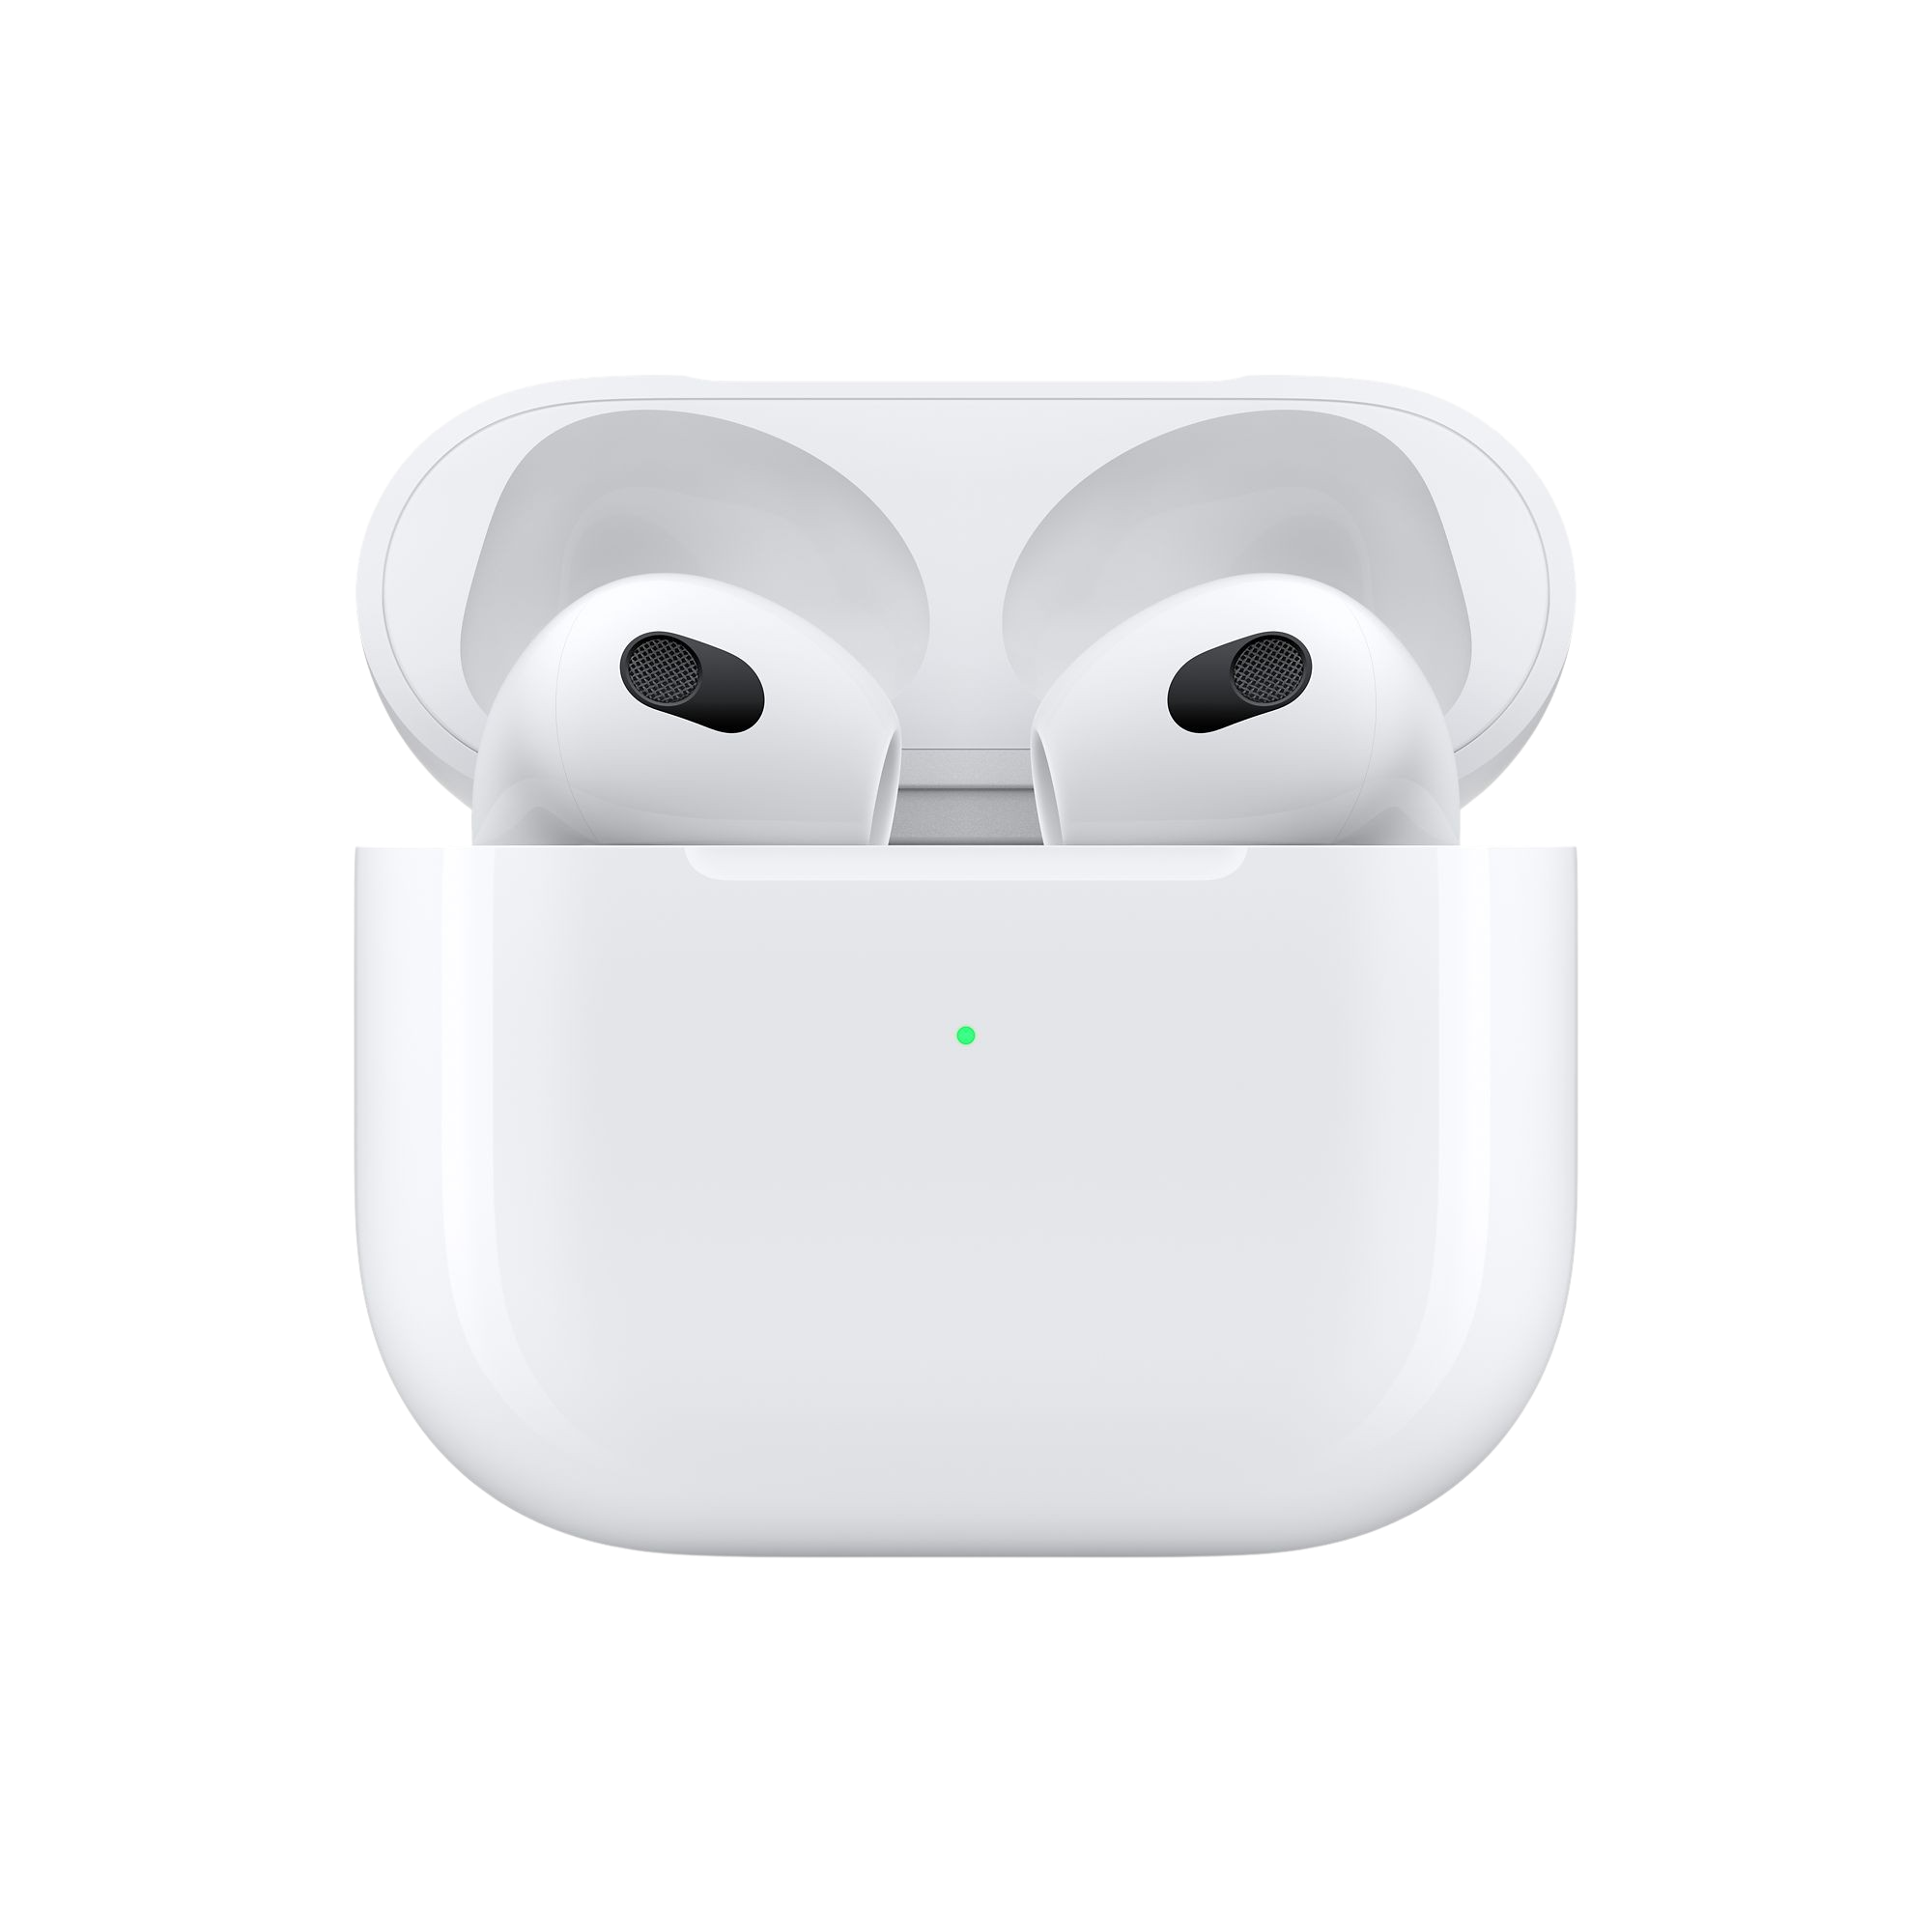 White Apple AirPods 3 In-ear Bluetooth Headphones.4